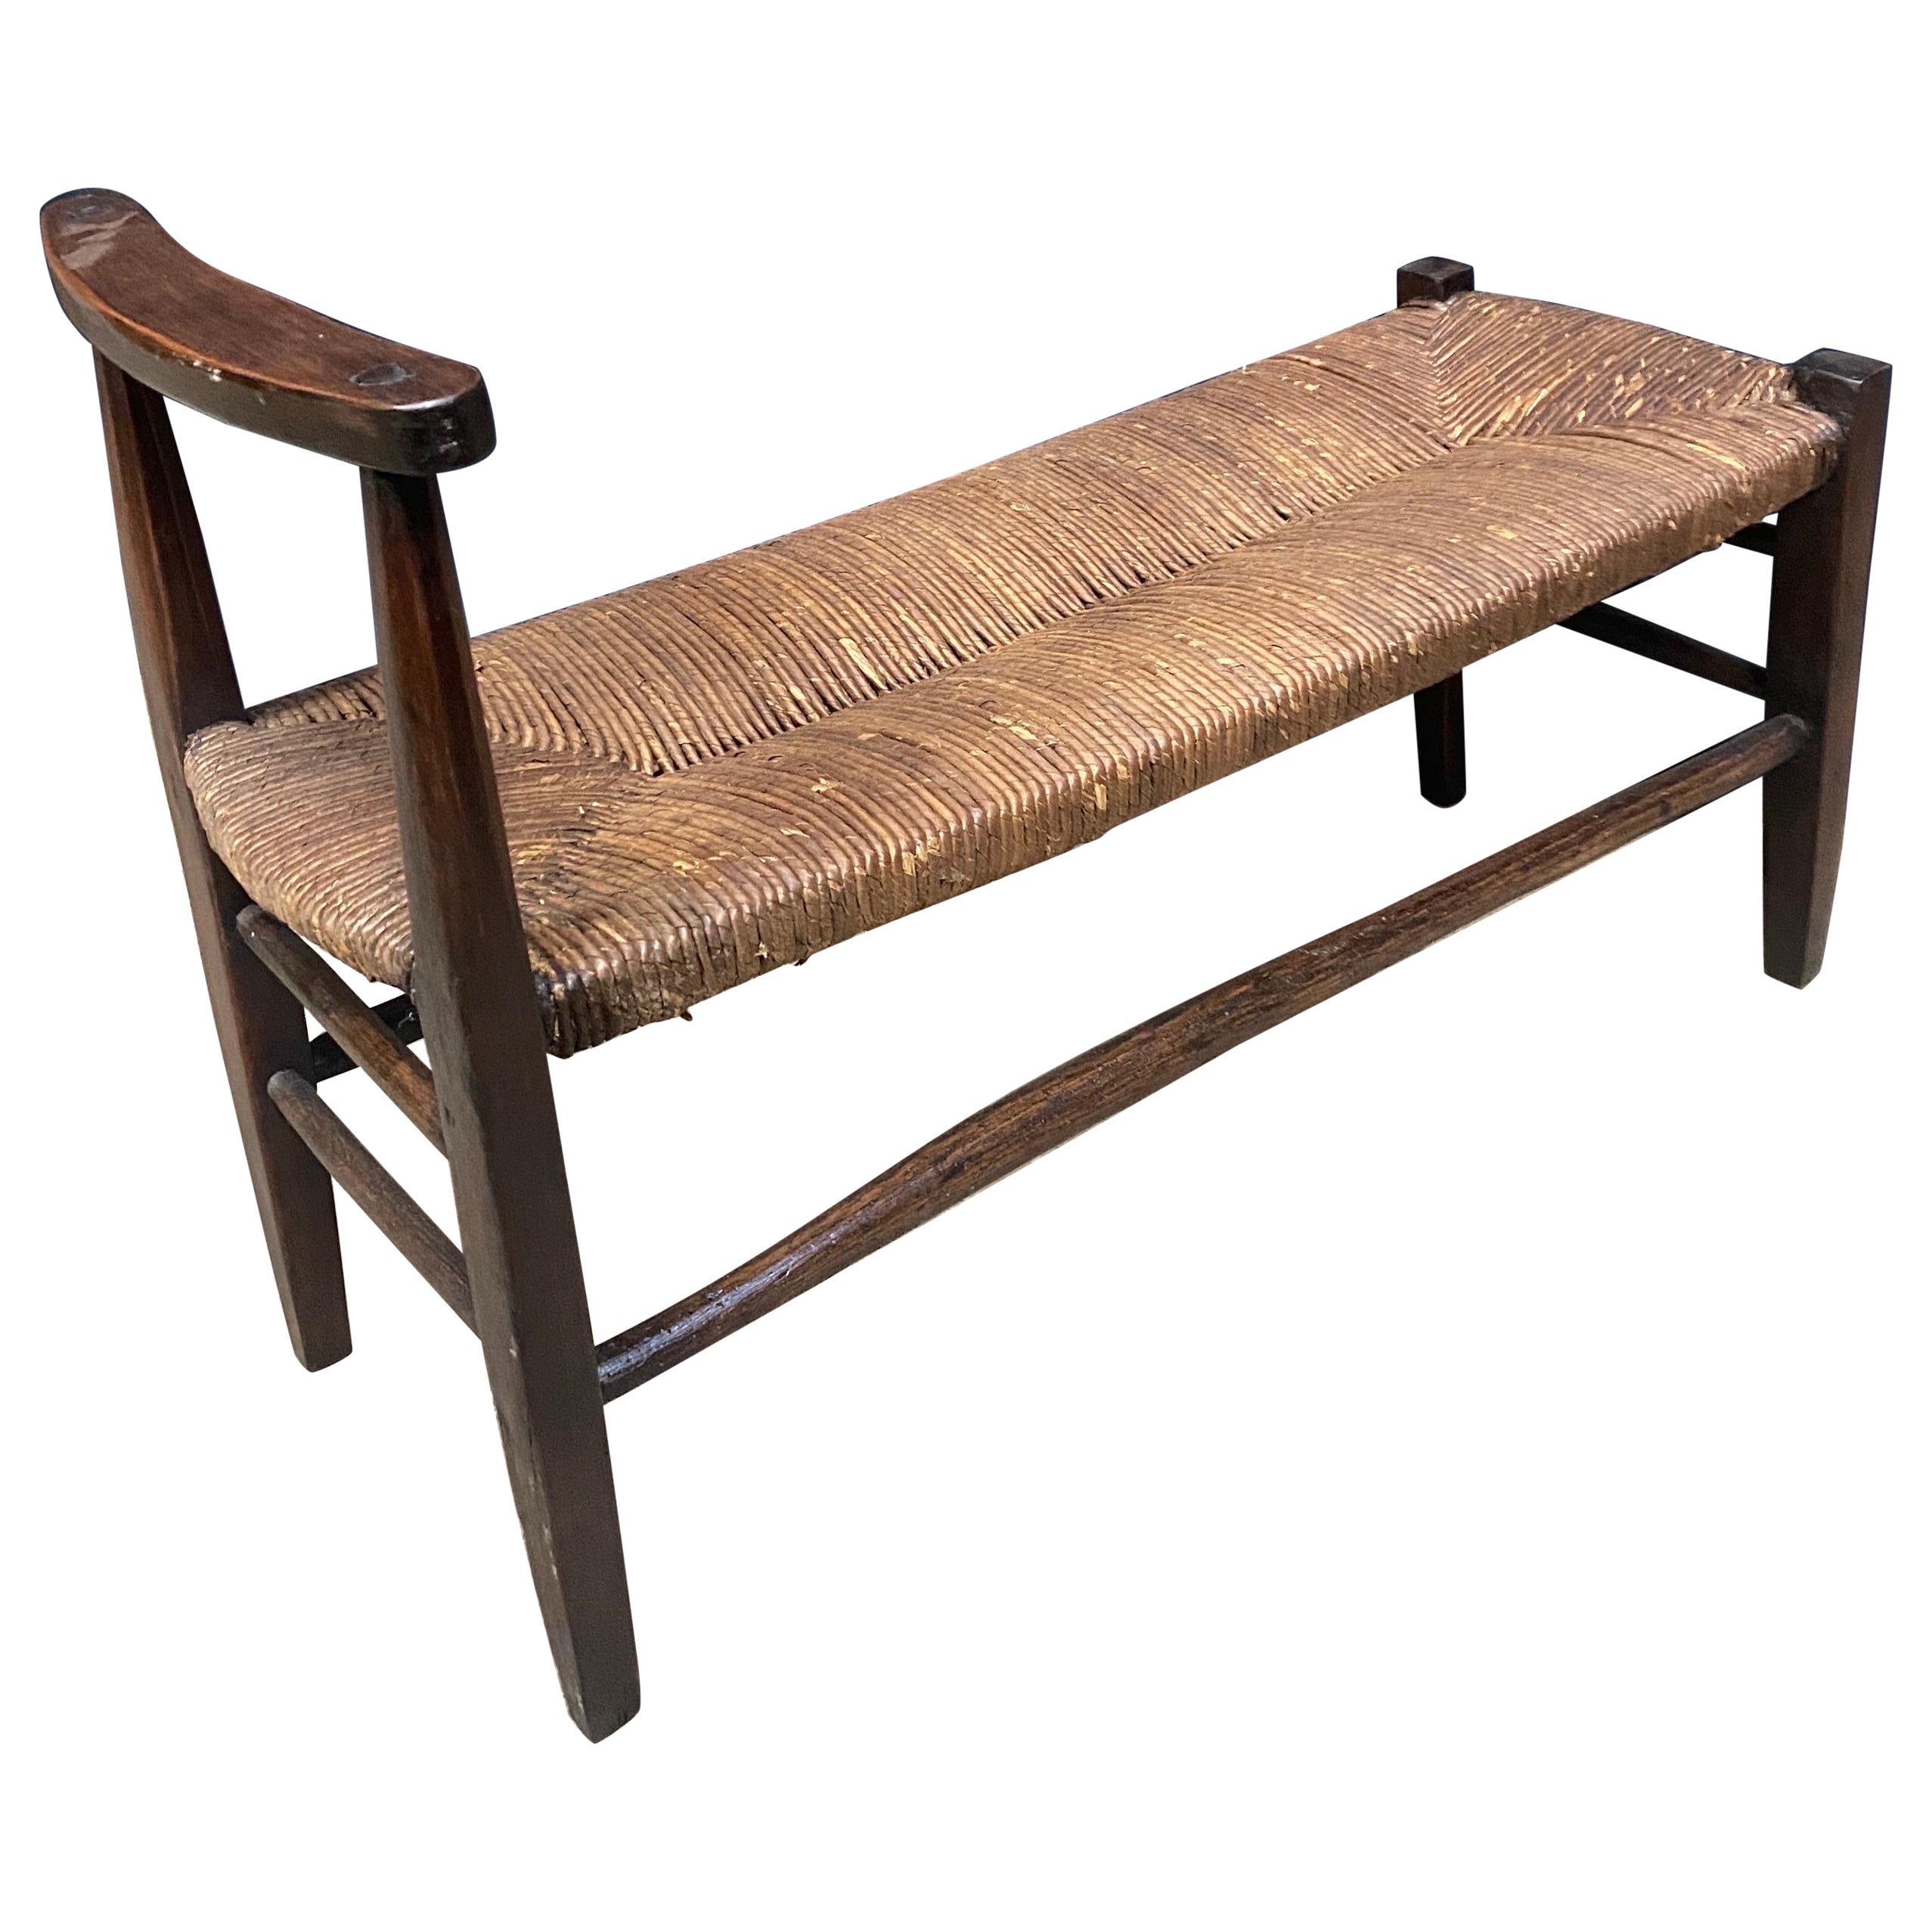 18th century fireplace bench ( cantou)